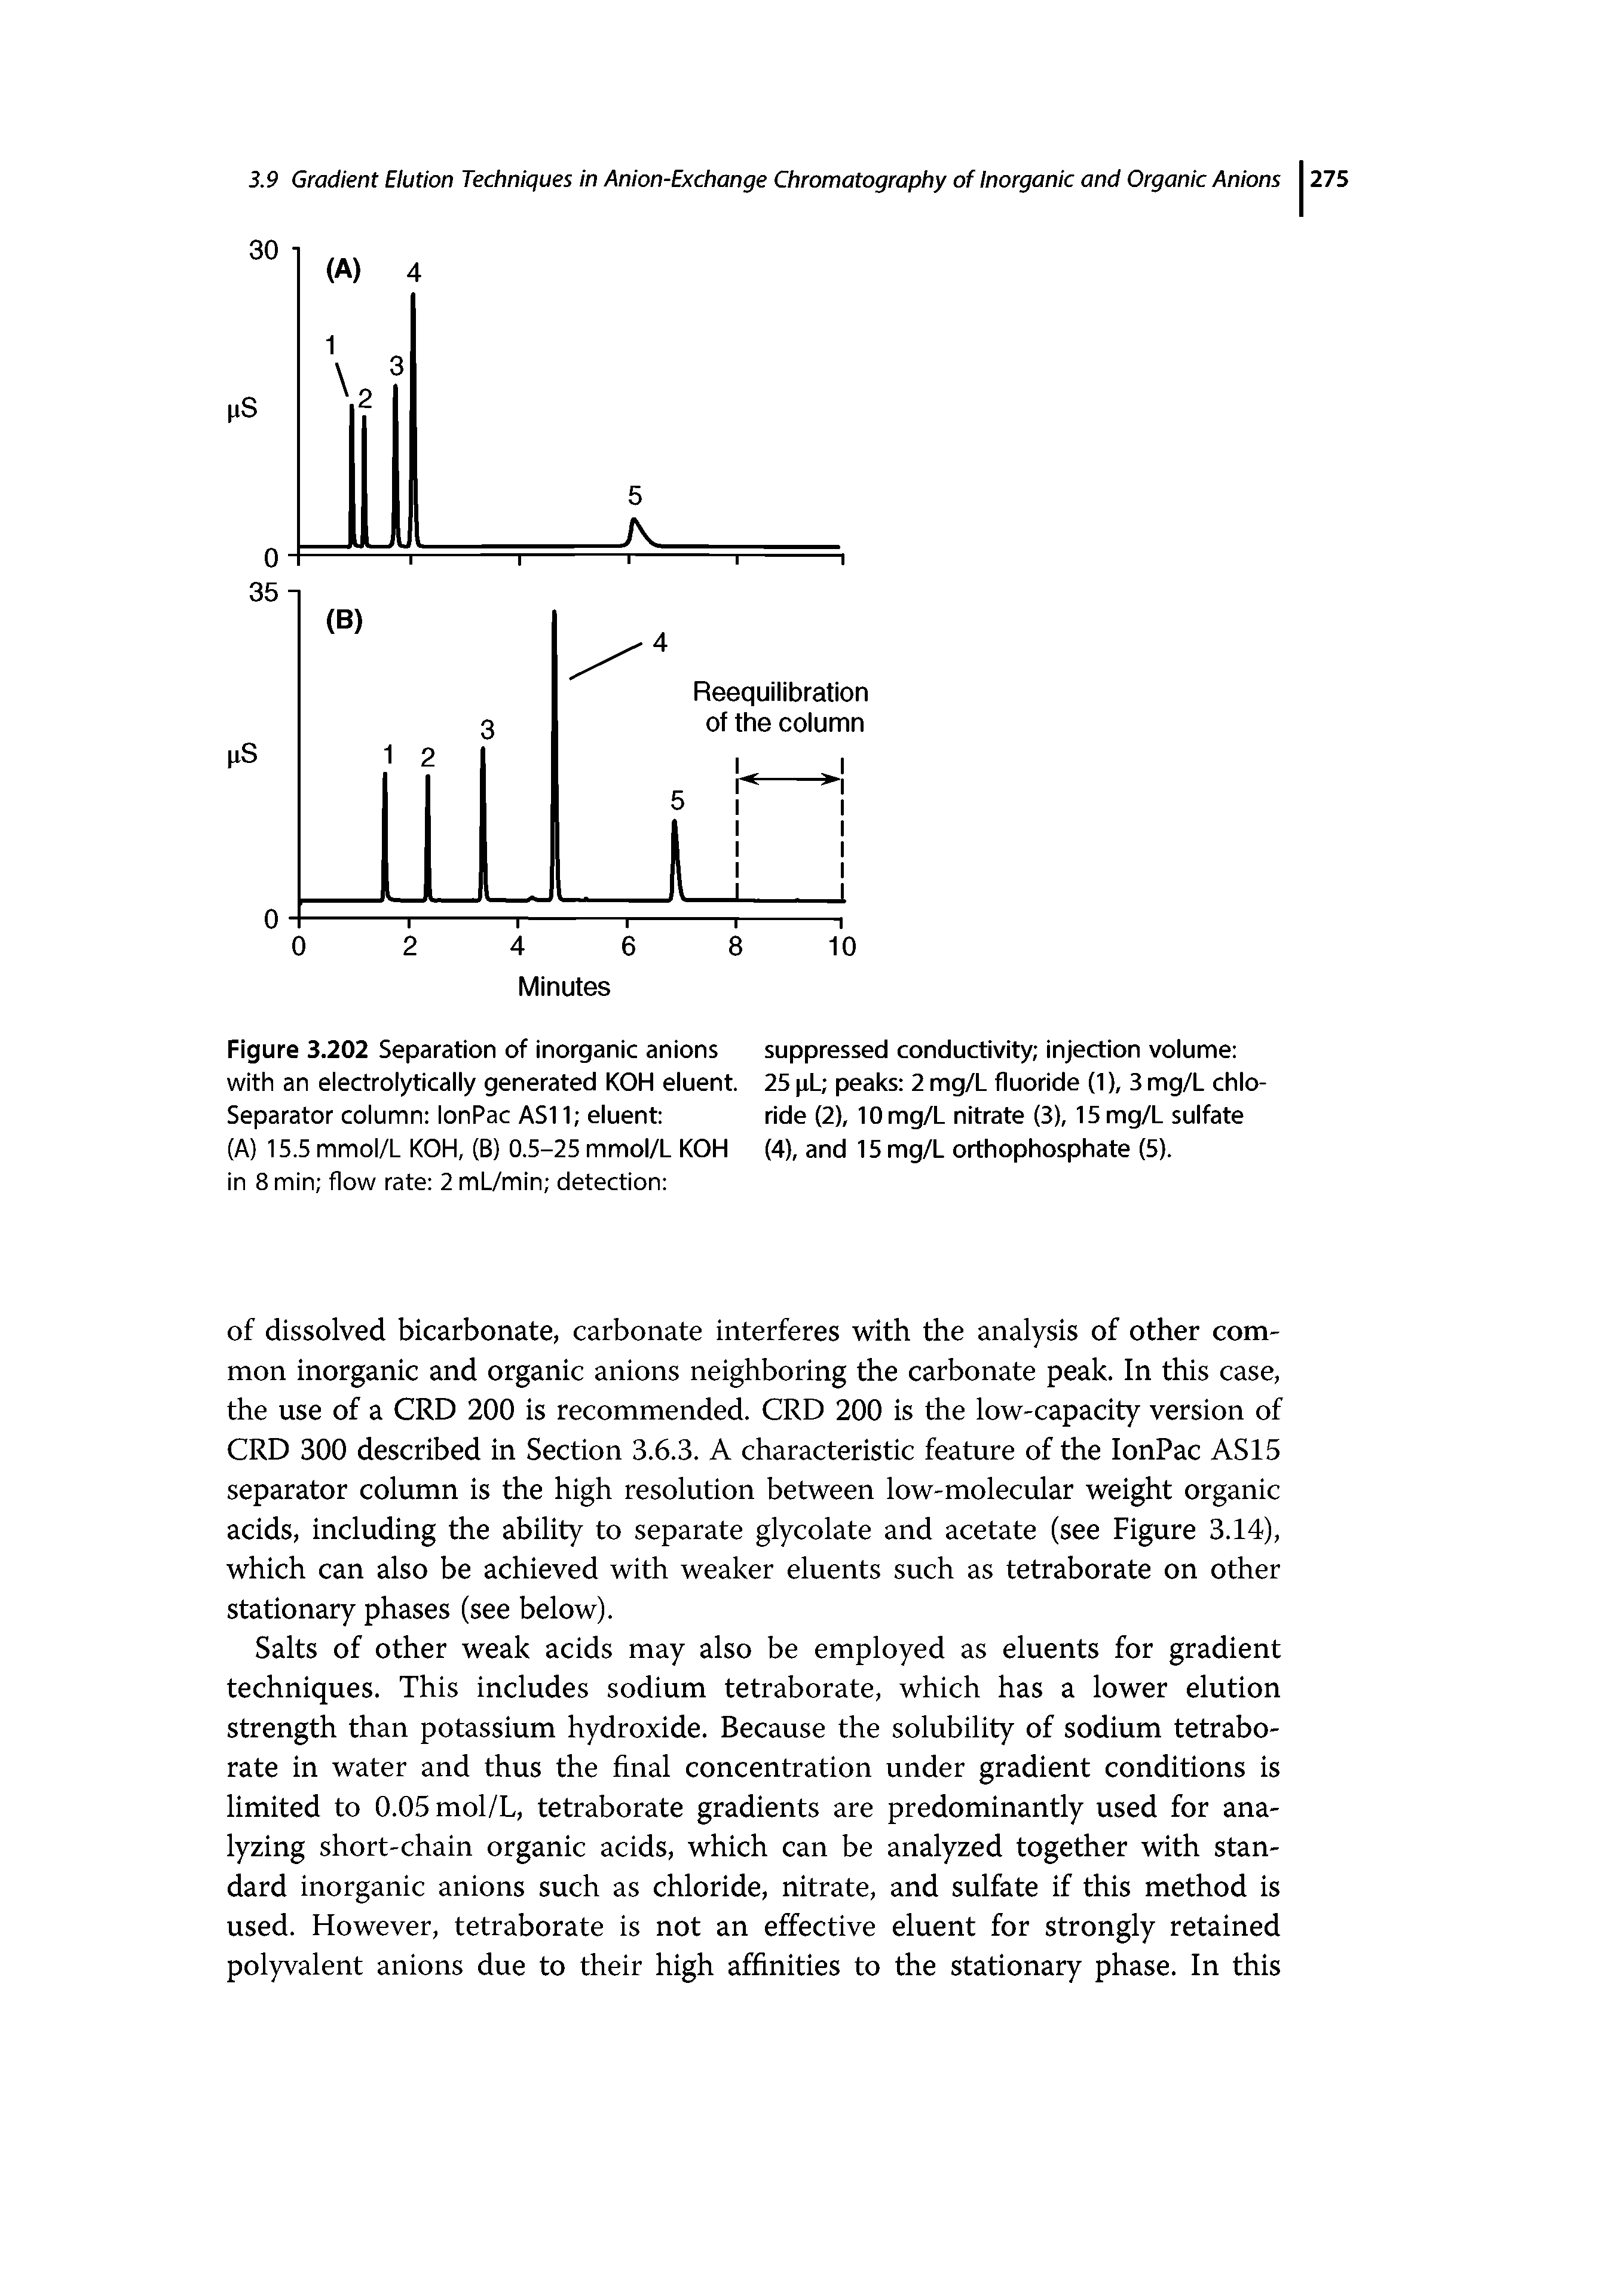 Figure 3.202 Separation of inorganic anions with an electrolytically generated KOH eluent. Separator column lonPac AS11 eluent ...